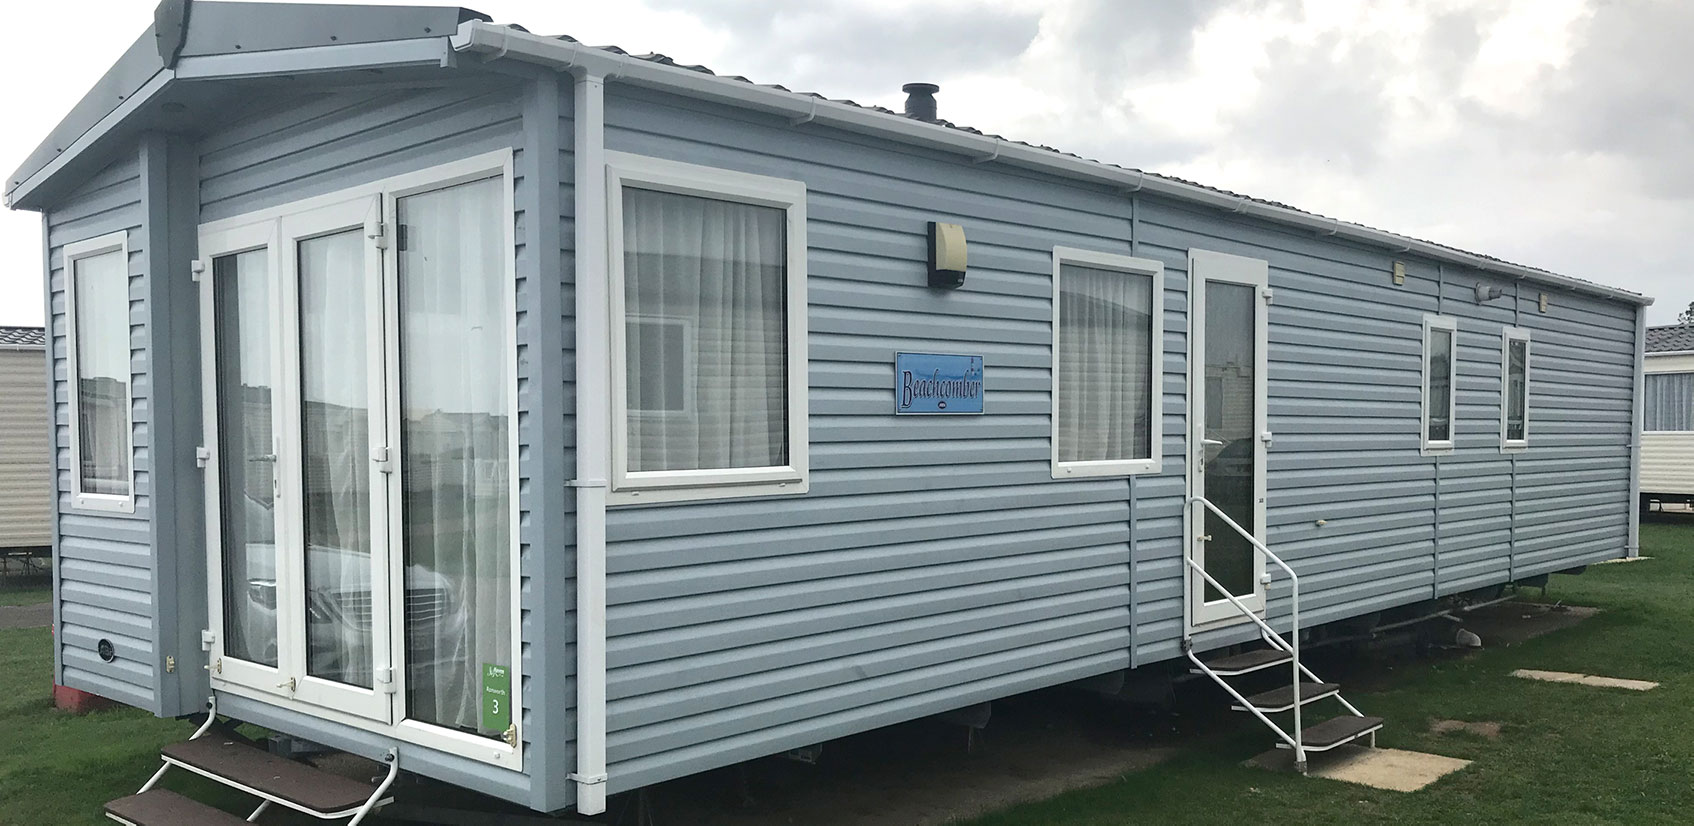 We have a large range of new and used holiday homes all at great prices